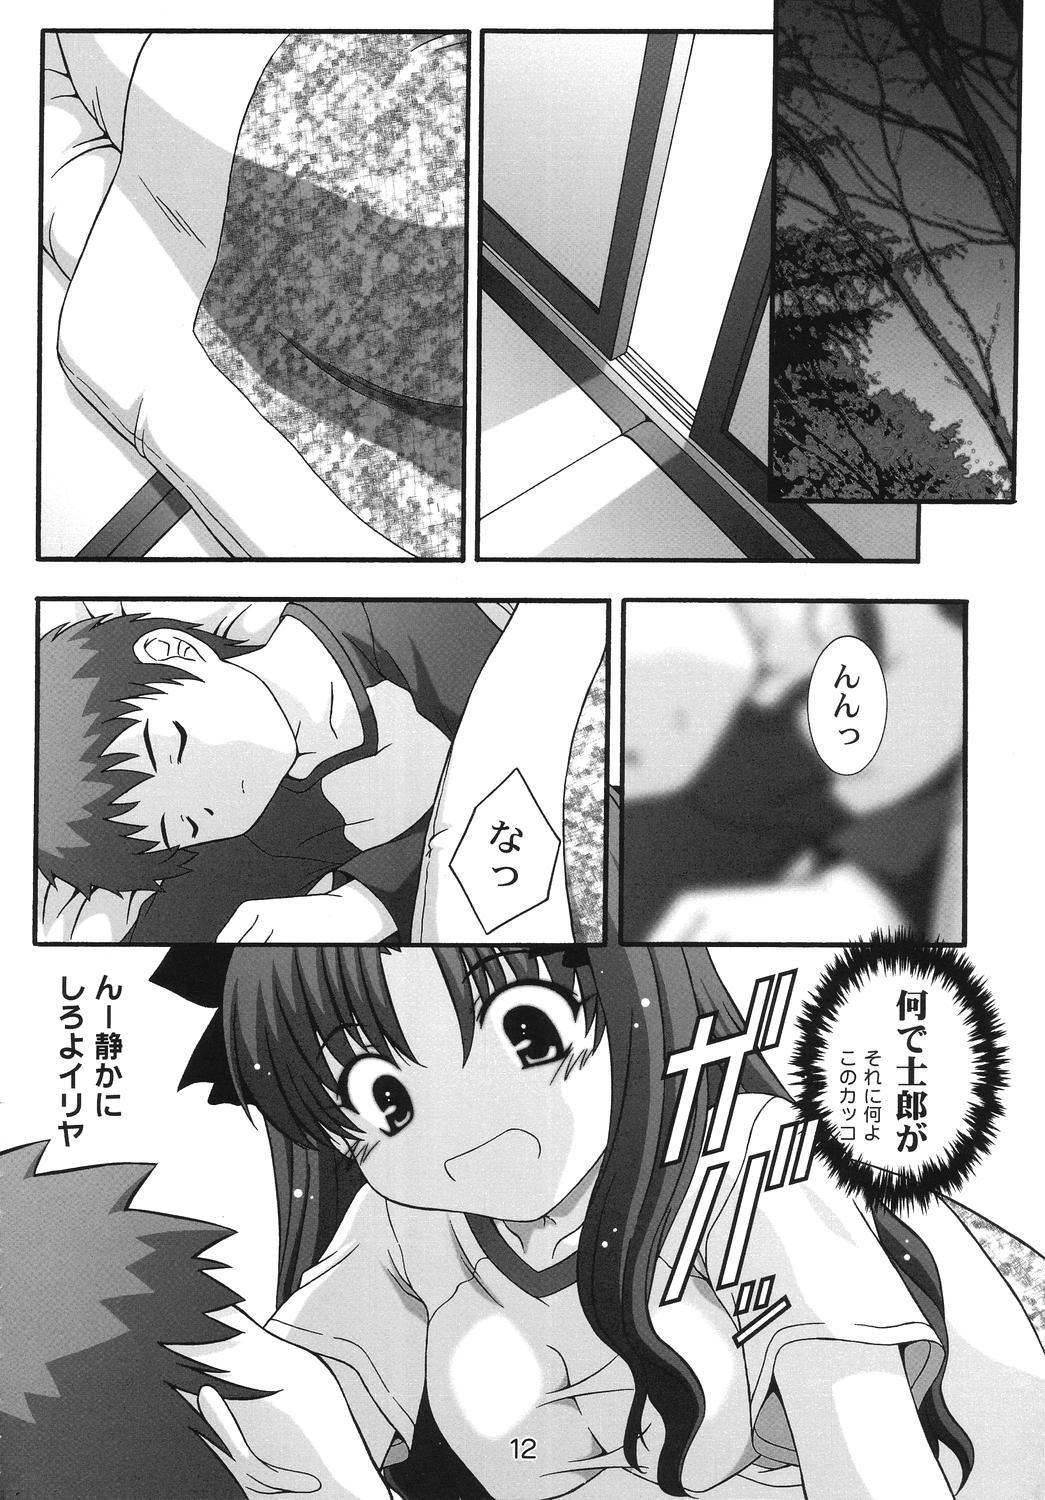 Snatch SECRET FILE NEXT 11 - Fate is capricious - Fate stay night Freaky - Page 11